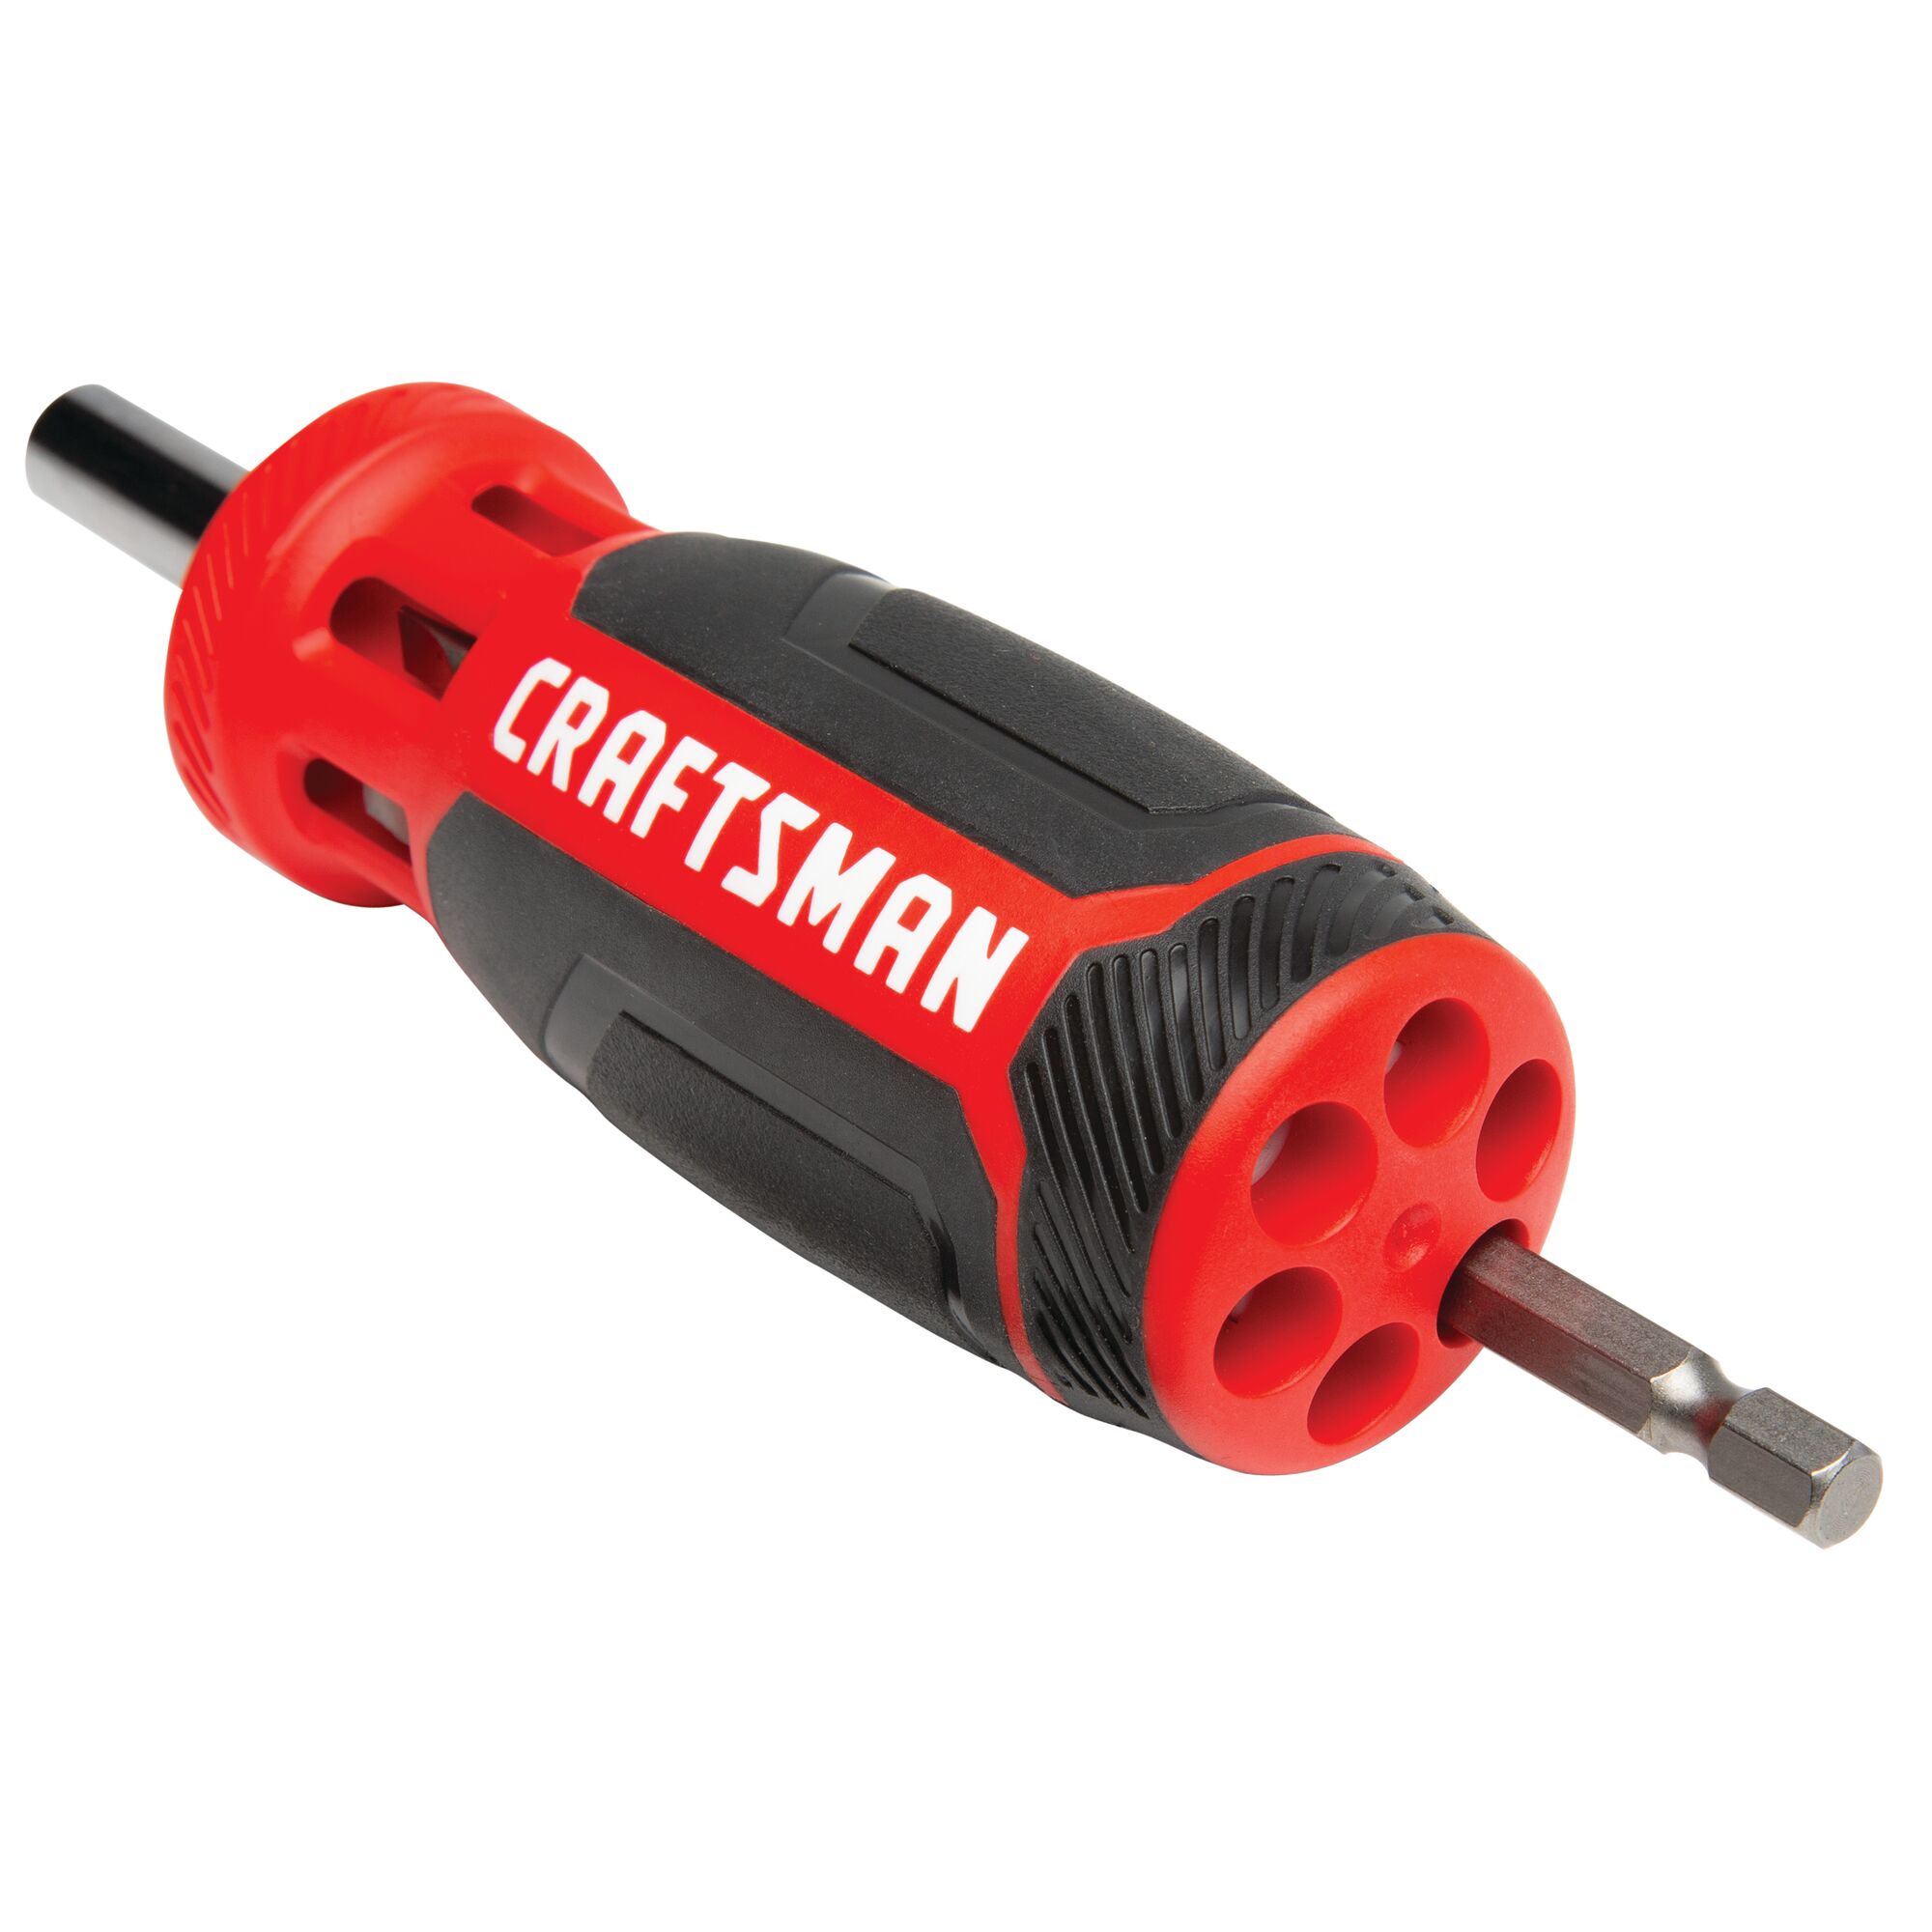 View of CRAFTSMAN Screwdrivers: Multi Bits highlighting product features